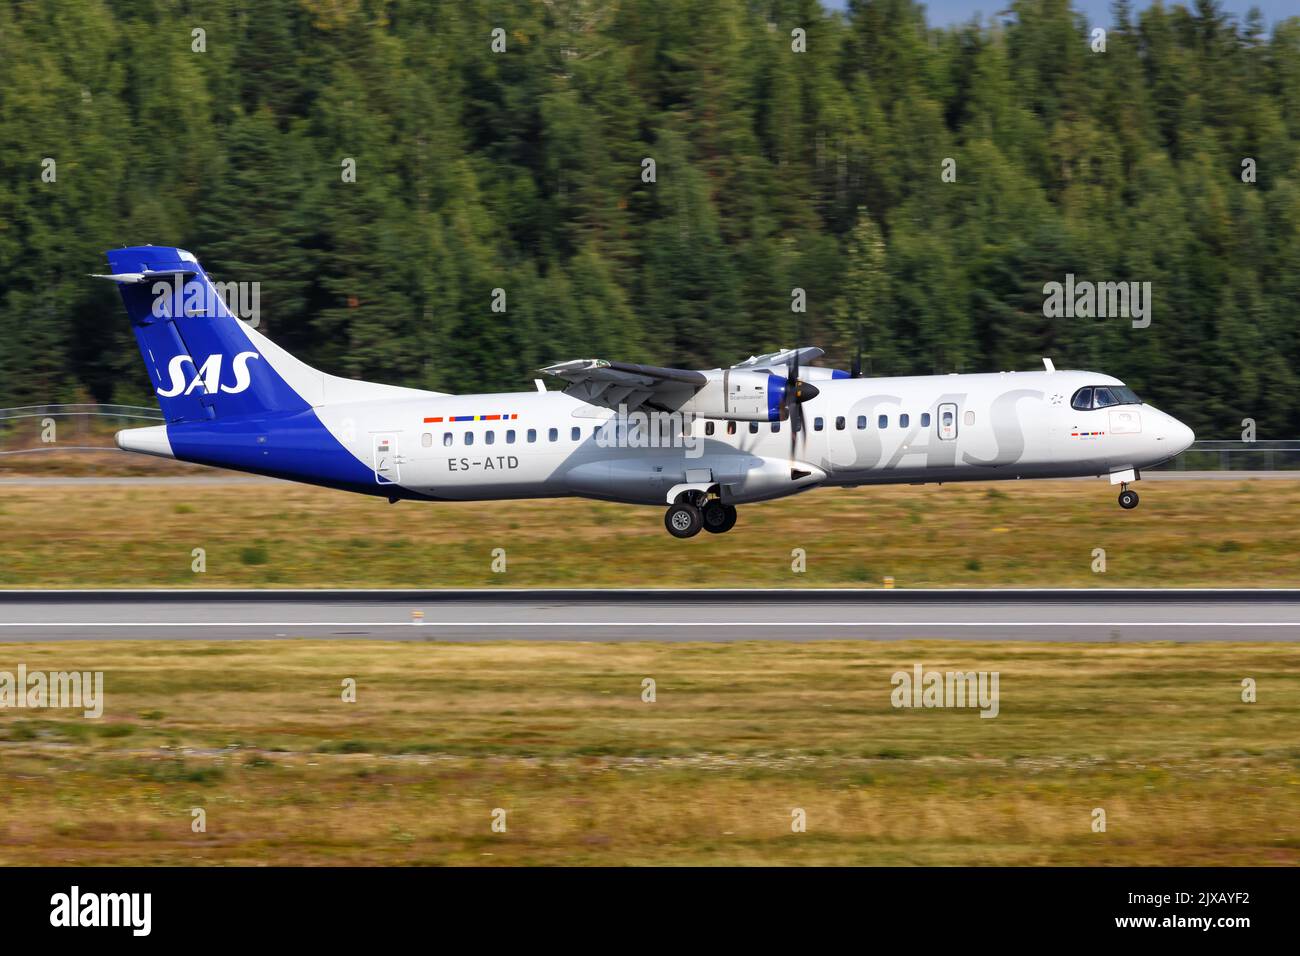 Oslo, Norway - August 15, 2022: SAS Scandinavian Airlines ATR 72-600 airplane at Oslo airport (OSL) in Norway. Stock Photo